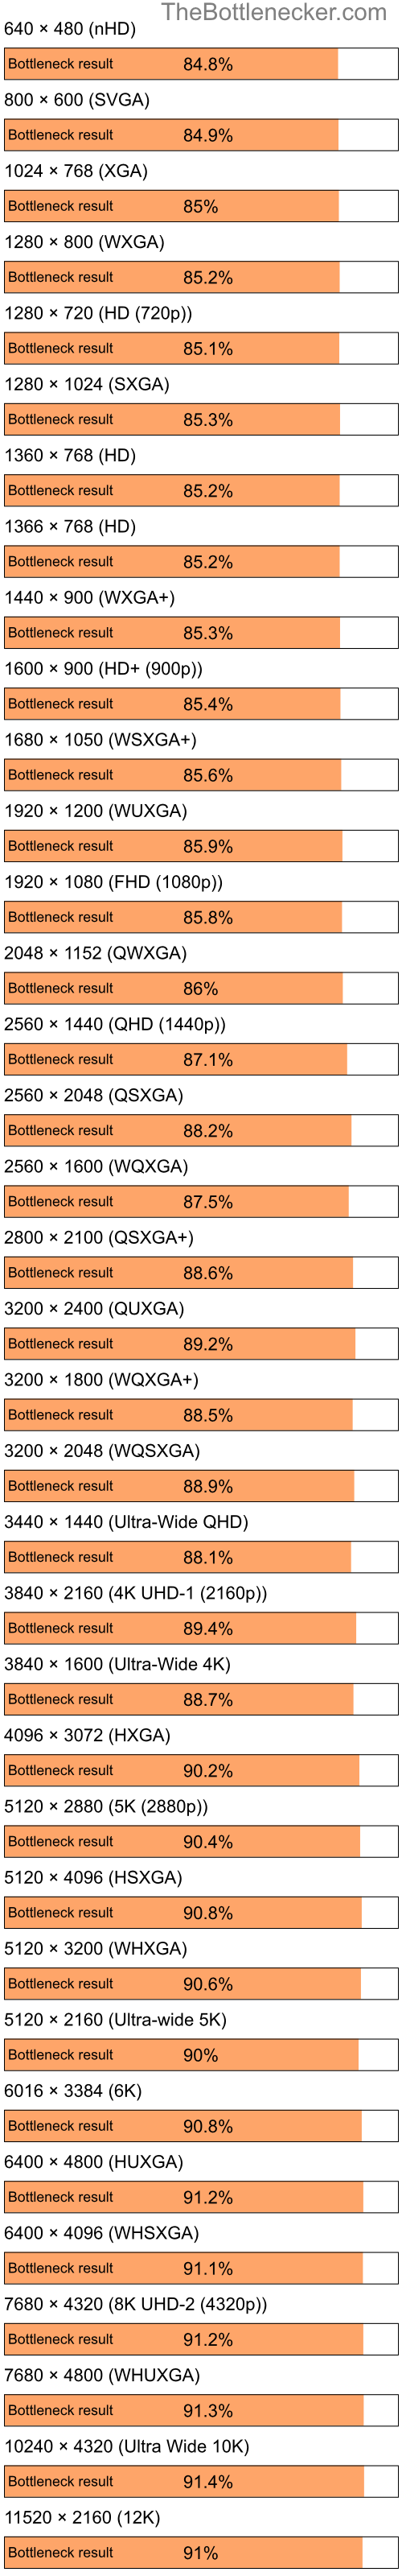 Bottleneck results by resolution for Intel Pentium 4 and NVIDIA GeForce FX 5500 in Processor Intense Tasks